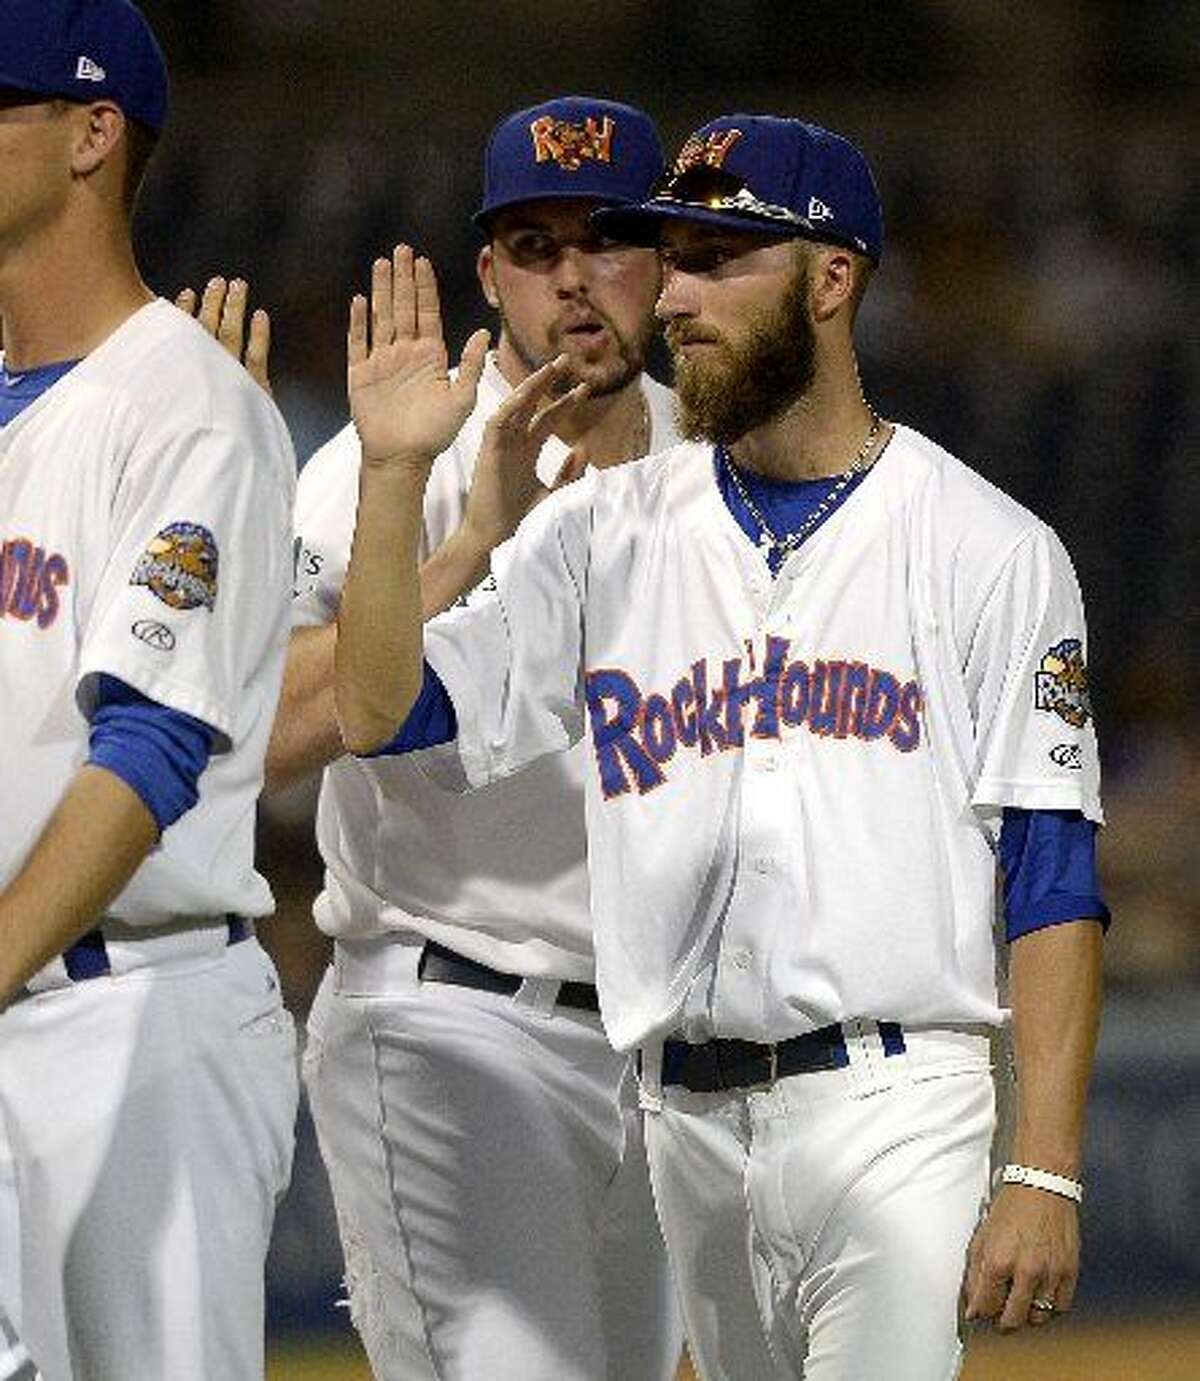 Rockhounds pitcher Dillon Overton high-fives teammates after a win against San Antonio on Thursday, July 23, 2015 at Security Bank Ballpark.